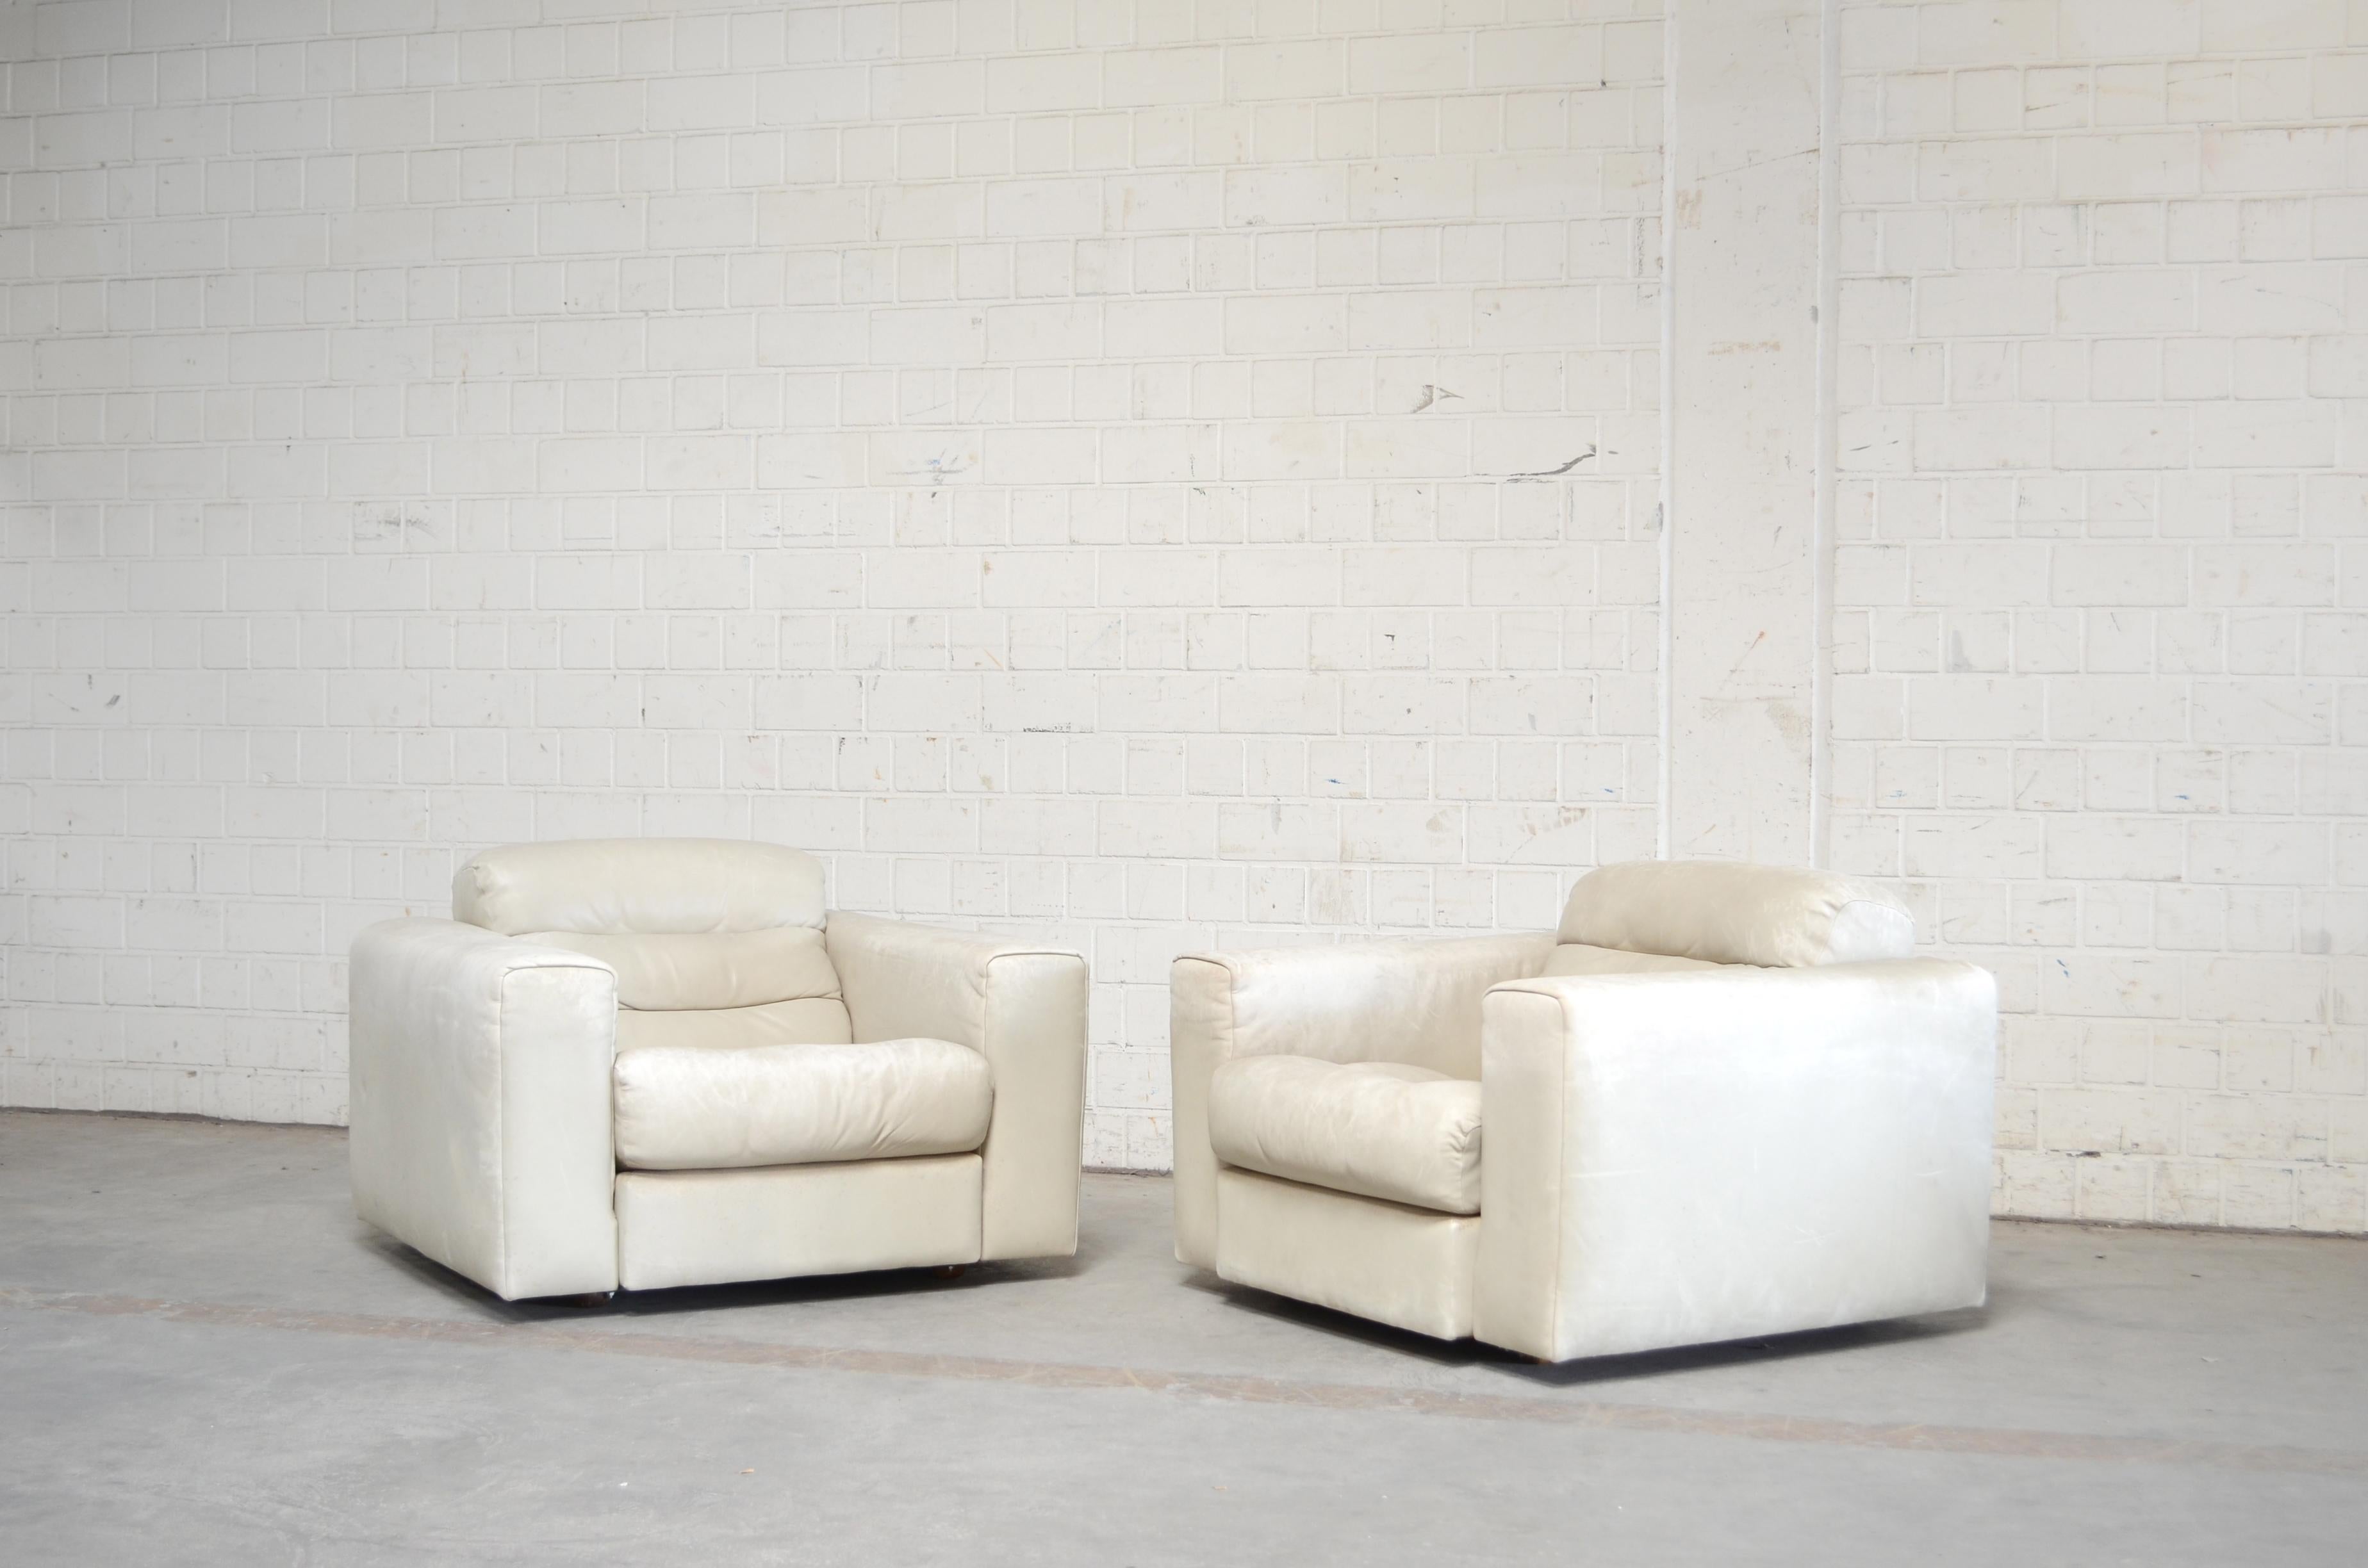 De Sede leather armchair DS 105.
Aniline leather in ecru white
Great comfort with an extendable seat for much more lounge comfort.
I´ts a rare De Sede model.
Hard to find.
We have 2 chairs in stock.
Price for 1.

 

 